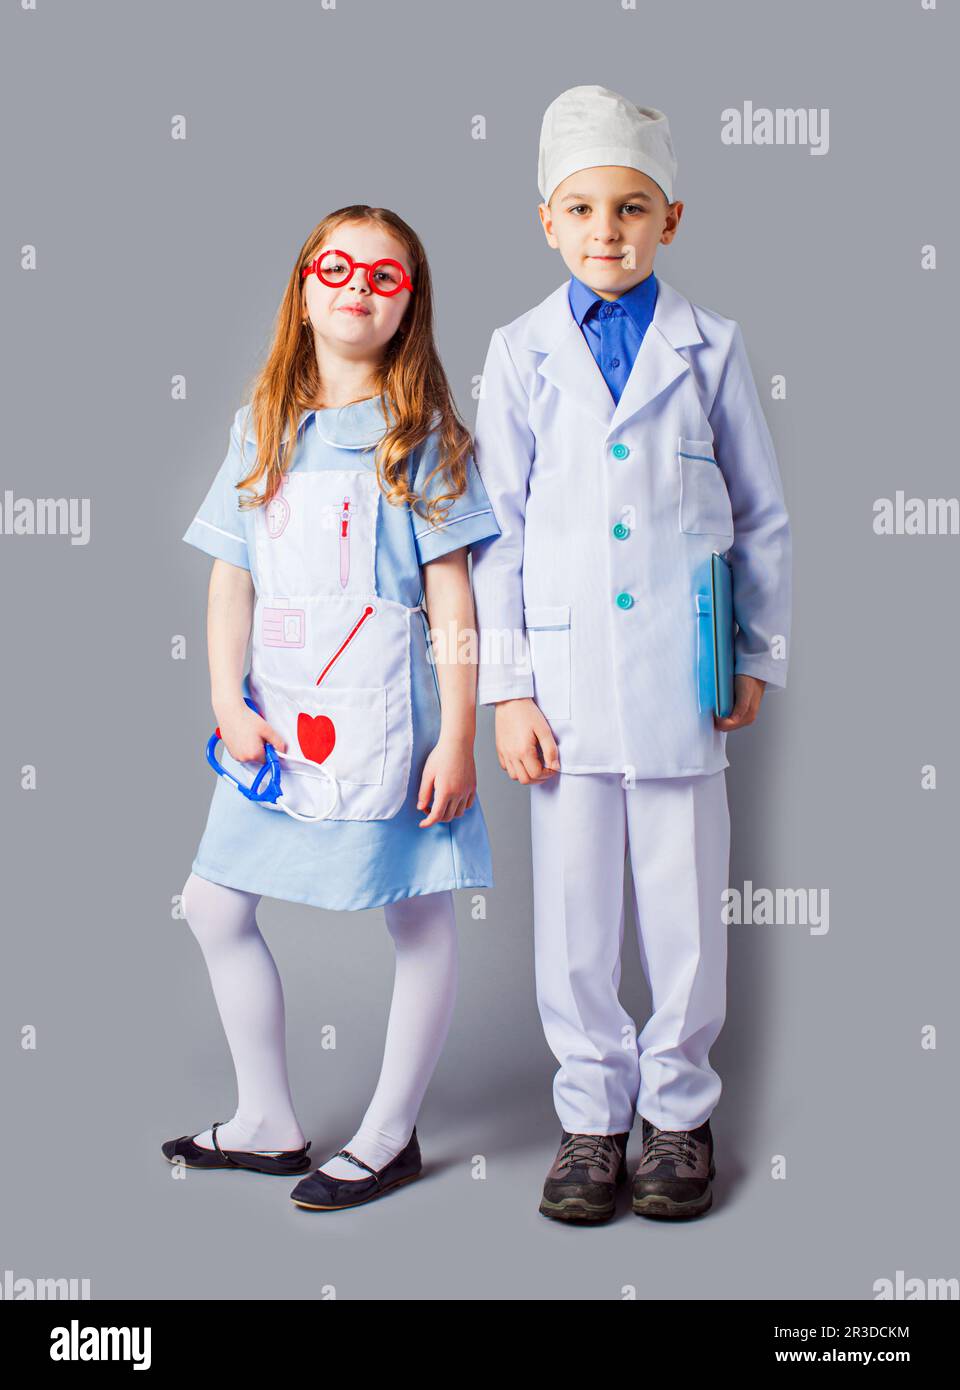 Cute boy and girl in medical uniform playing like doctors Stock Photo